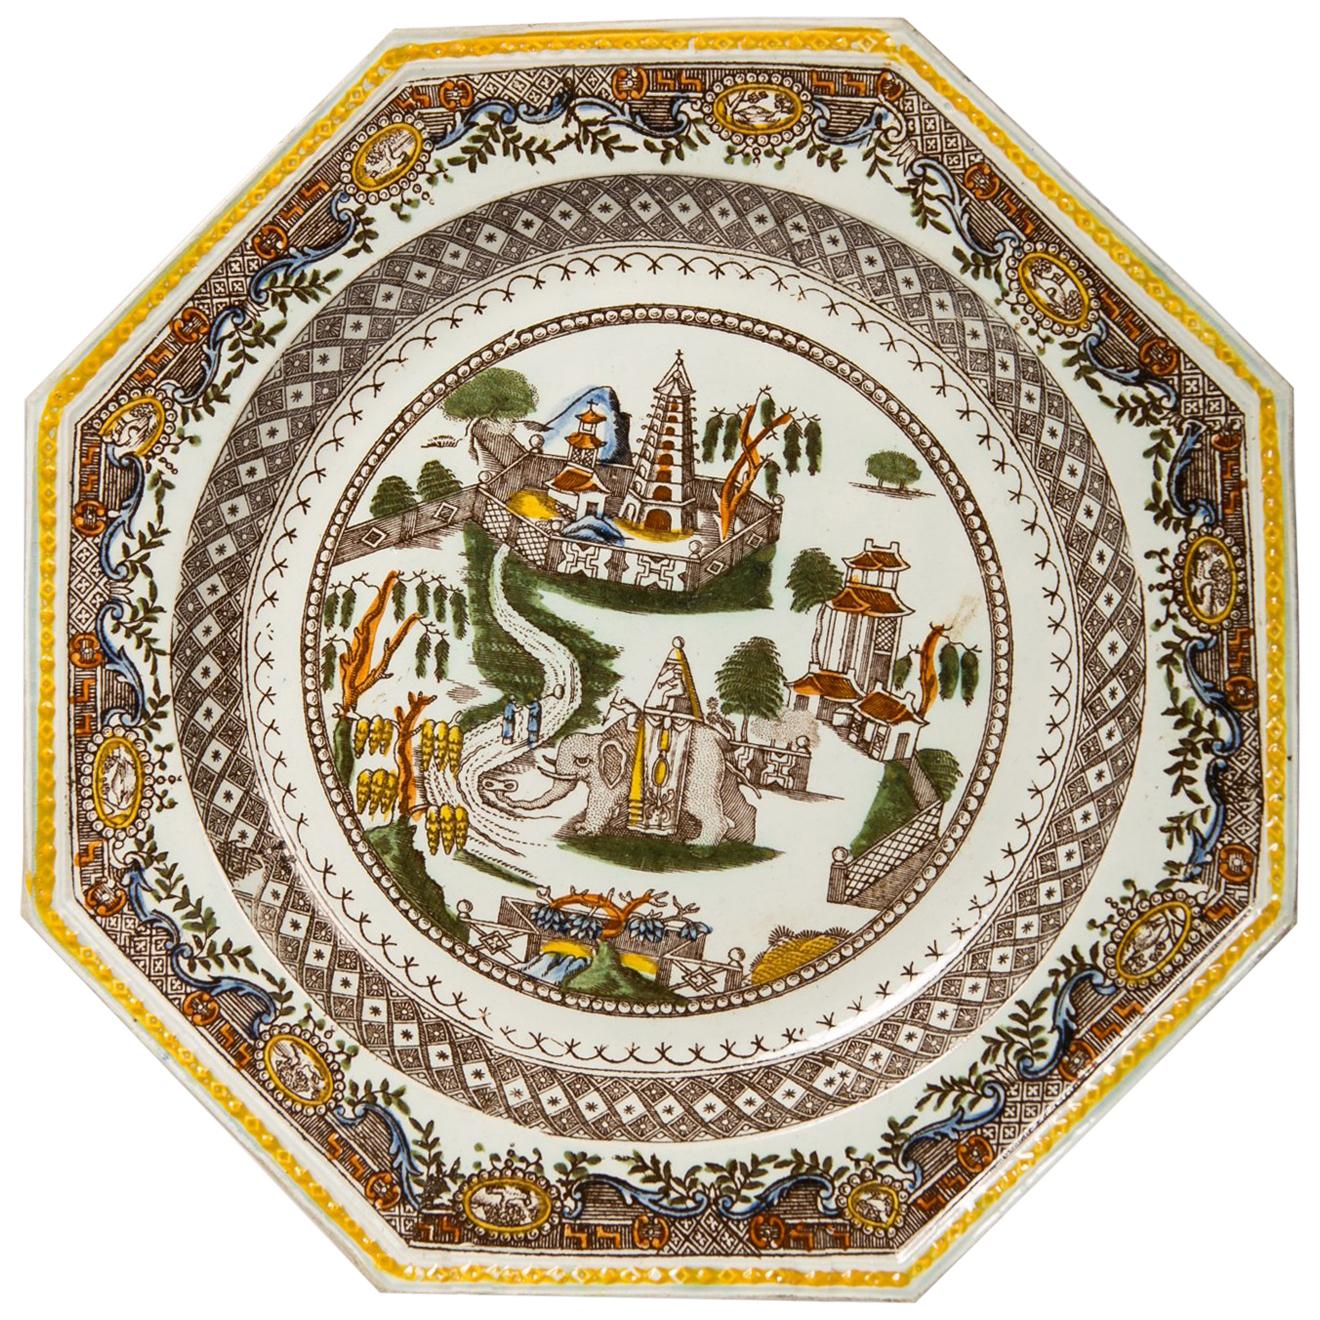 This pair of antique English dishes show a fabulous bird's eye view of an elephant in an imaginary Asian setting.
 Two figures ride an Indian elephant through an exotic landscape. Along a winding road, we see large fruit trees, fenced gardens, a